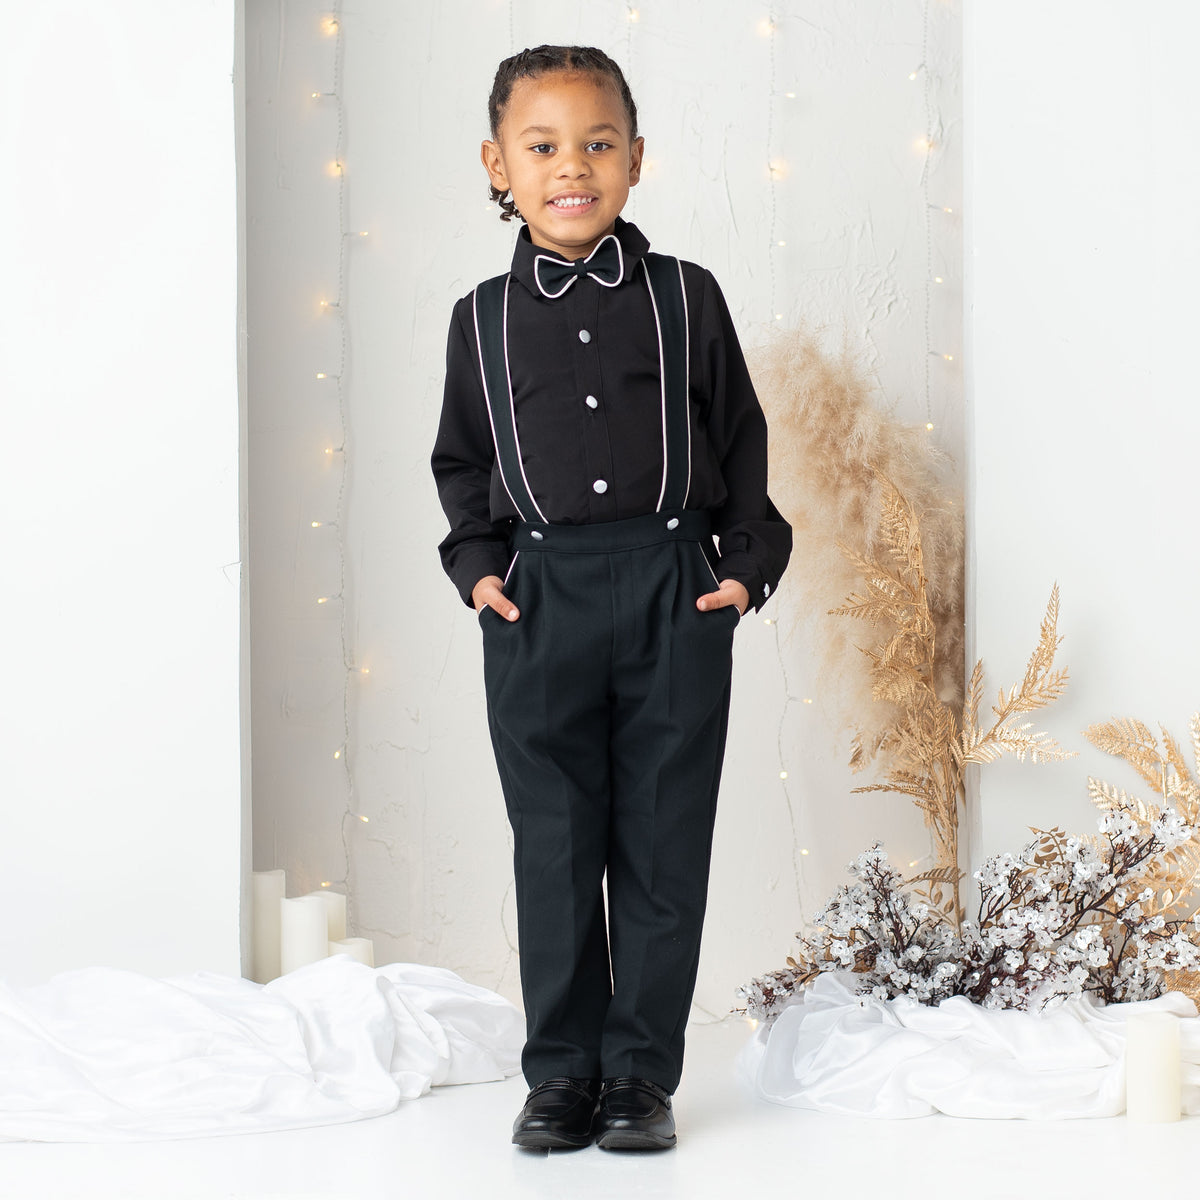 Itty Bitty Toes - Suits for young boys up to 12 years